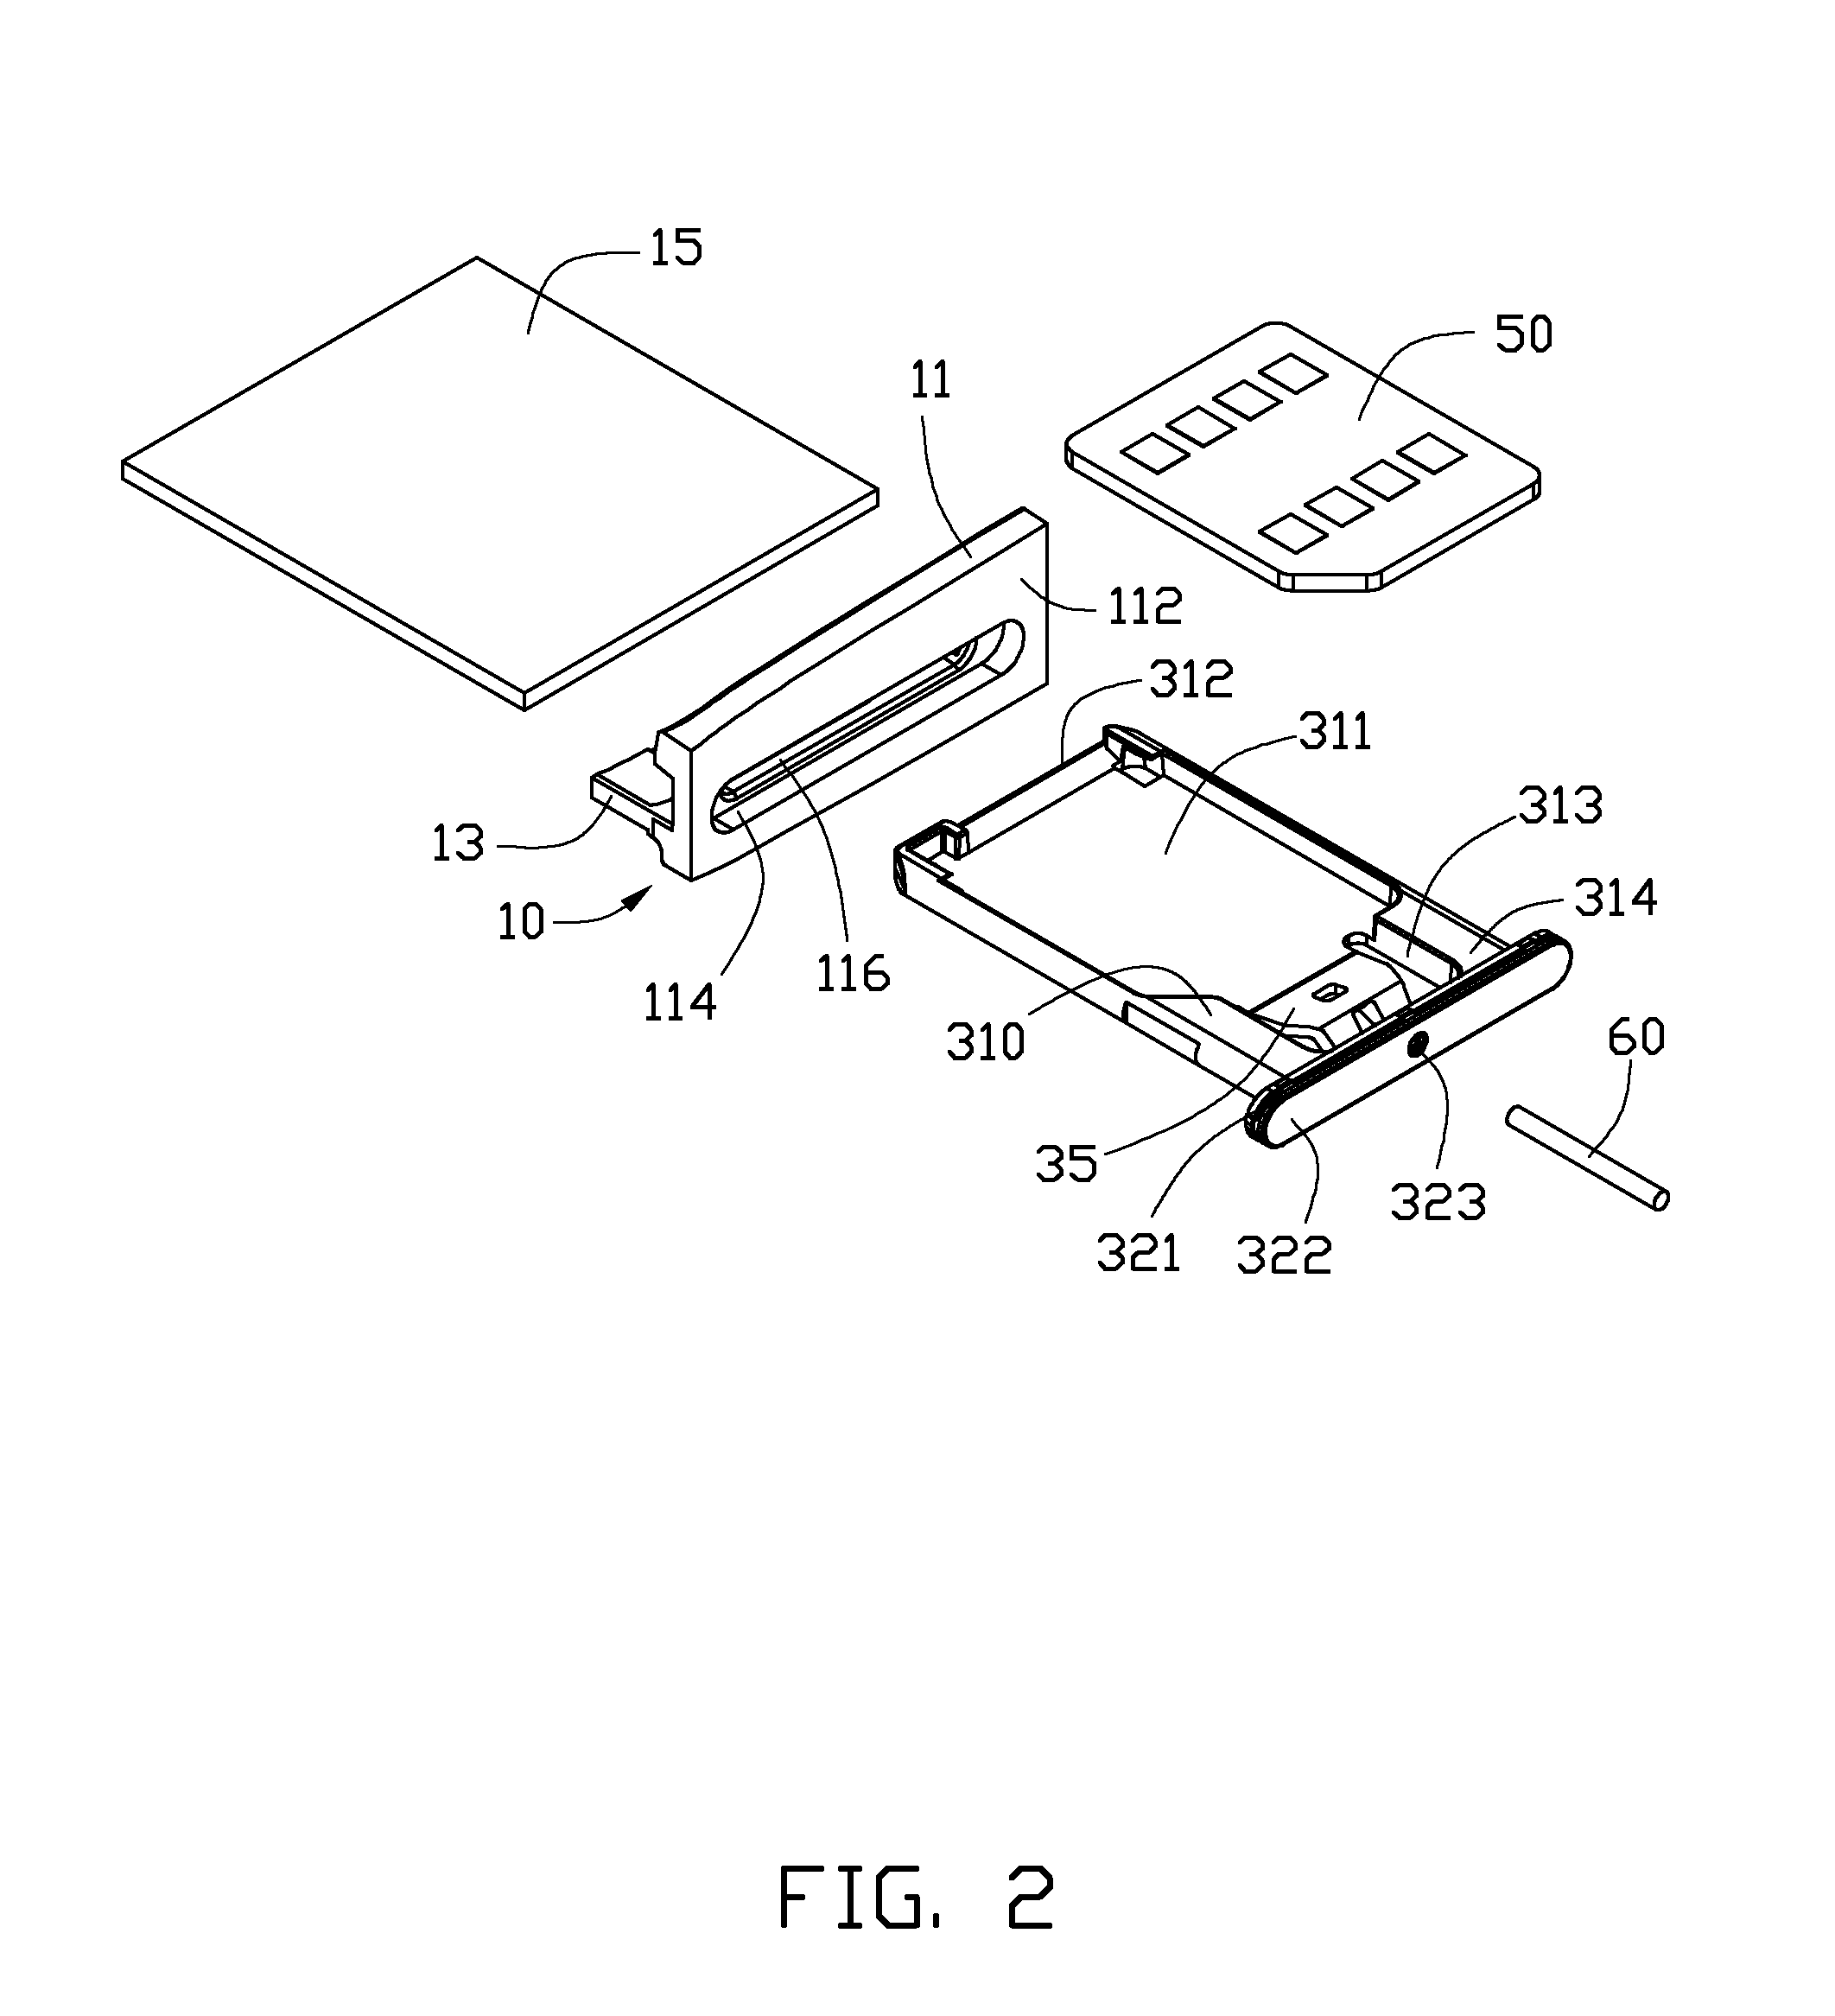 Chip card holder for electronic device